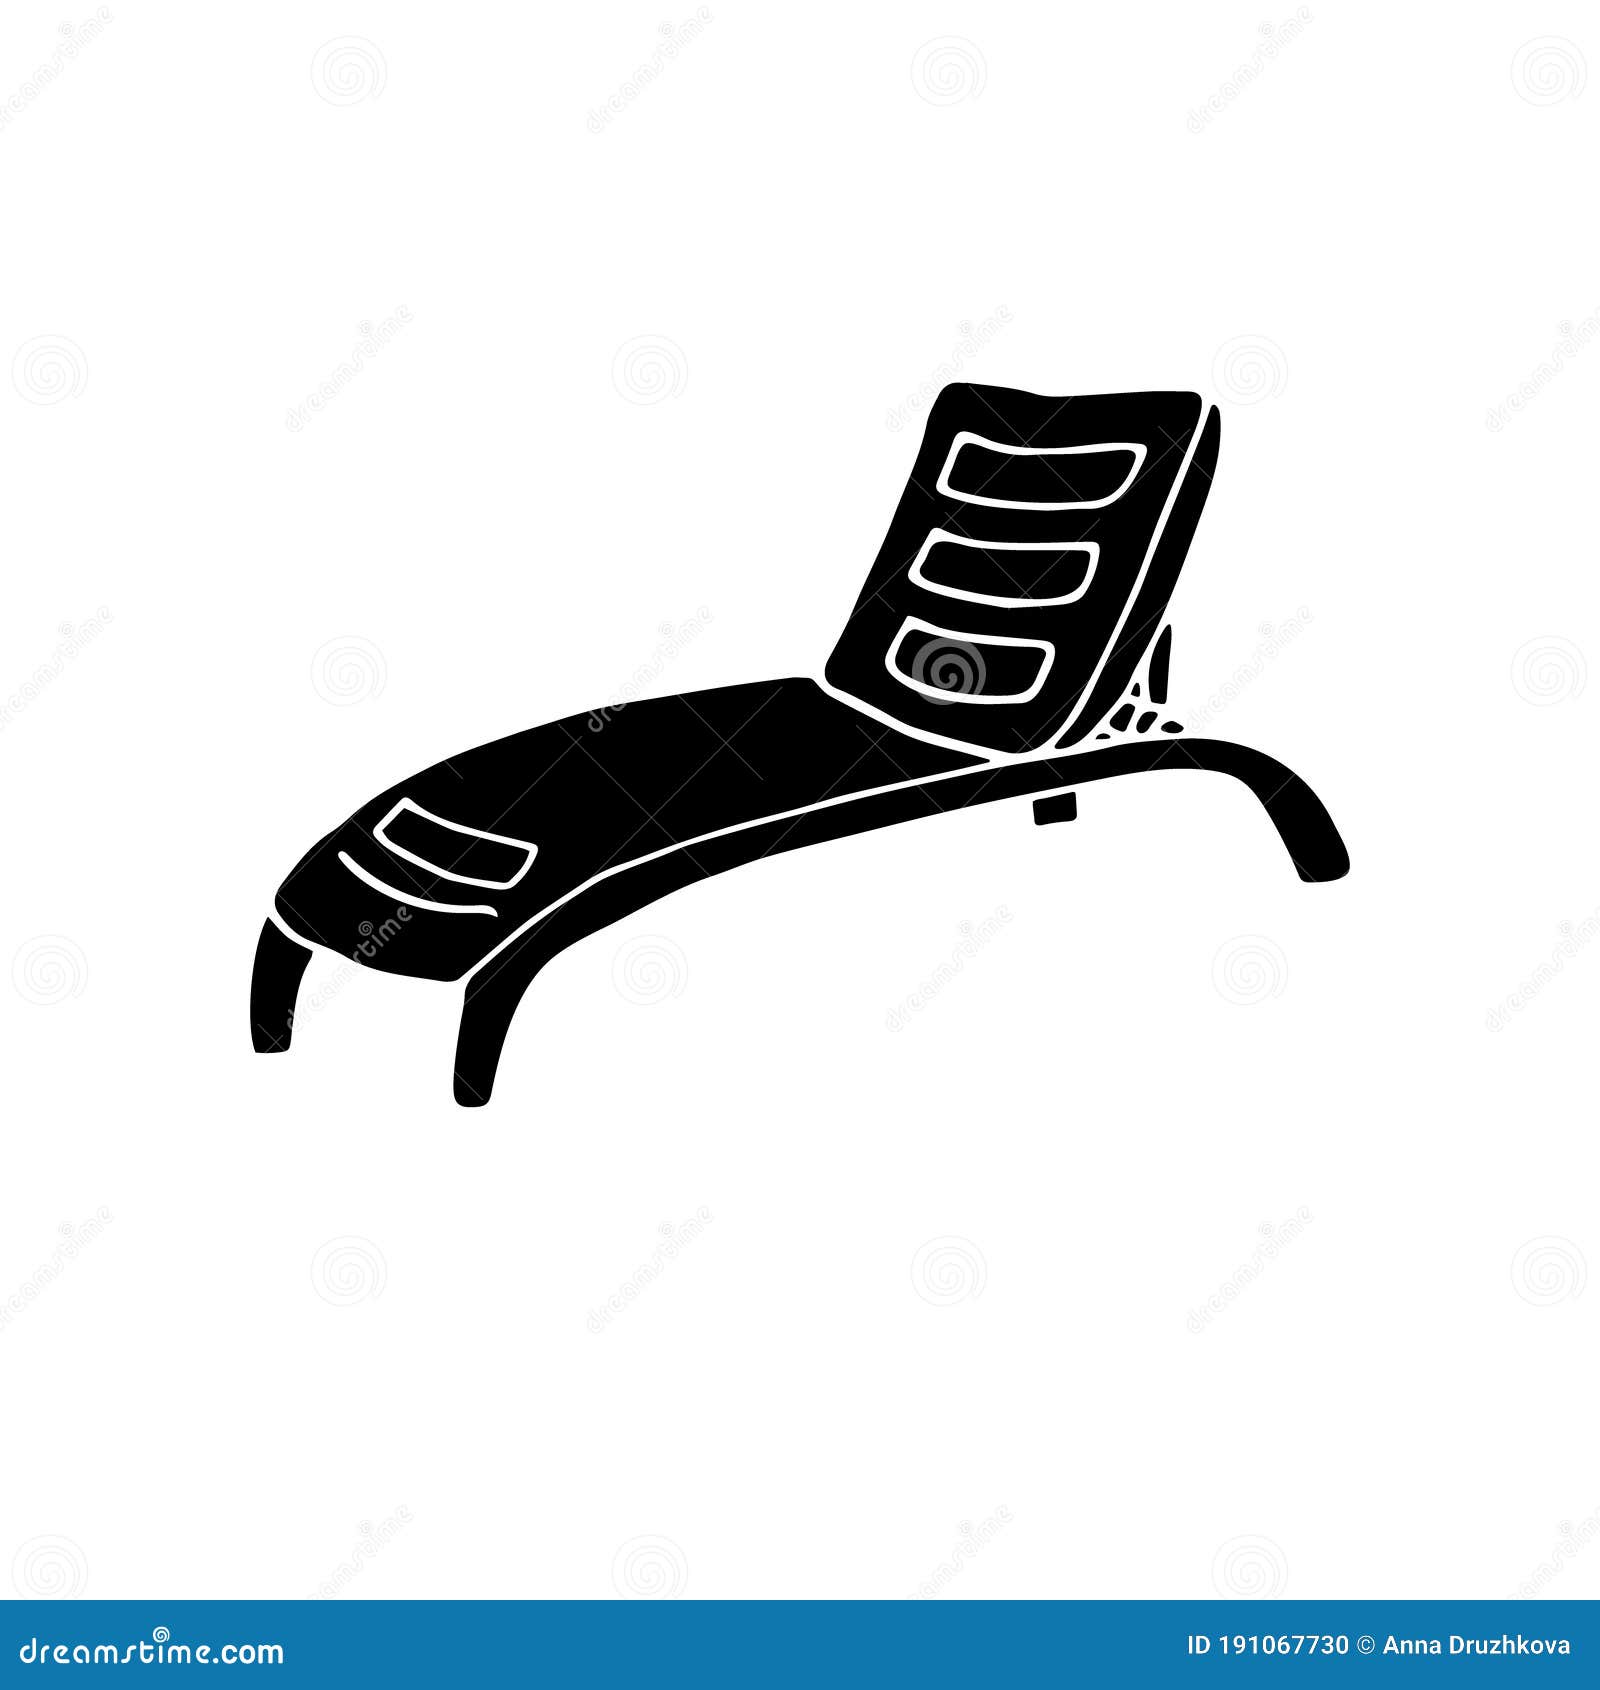 Vector Illustration of a Beach Bed Black Silhouette. Stock Vector ...